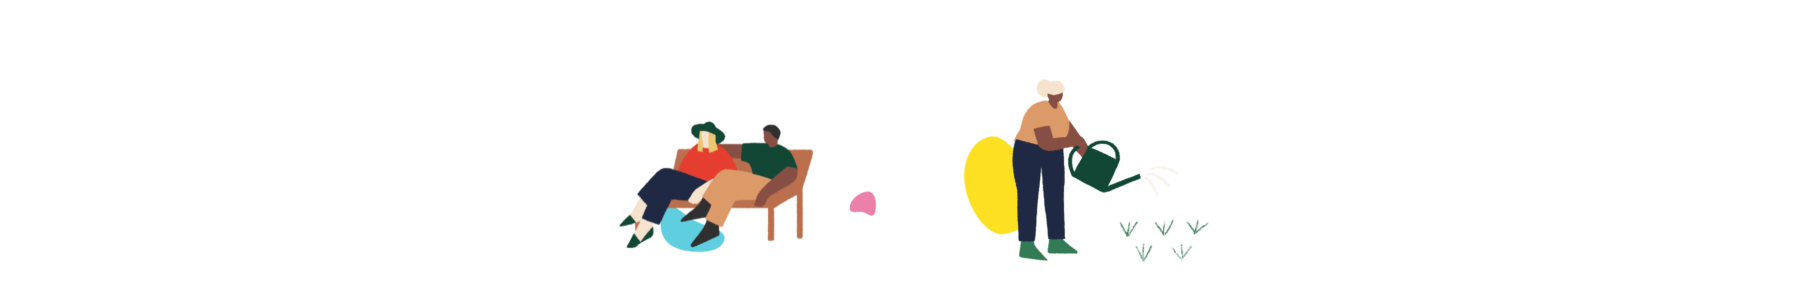 Illustrations of a couple sitting on a park bench and of a woman using a watering can to water 5 green plants